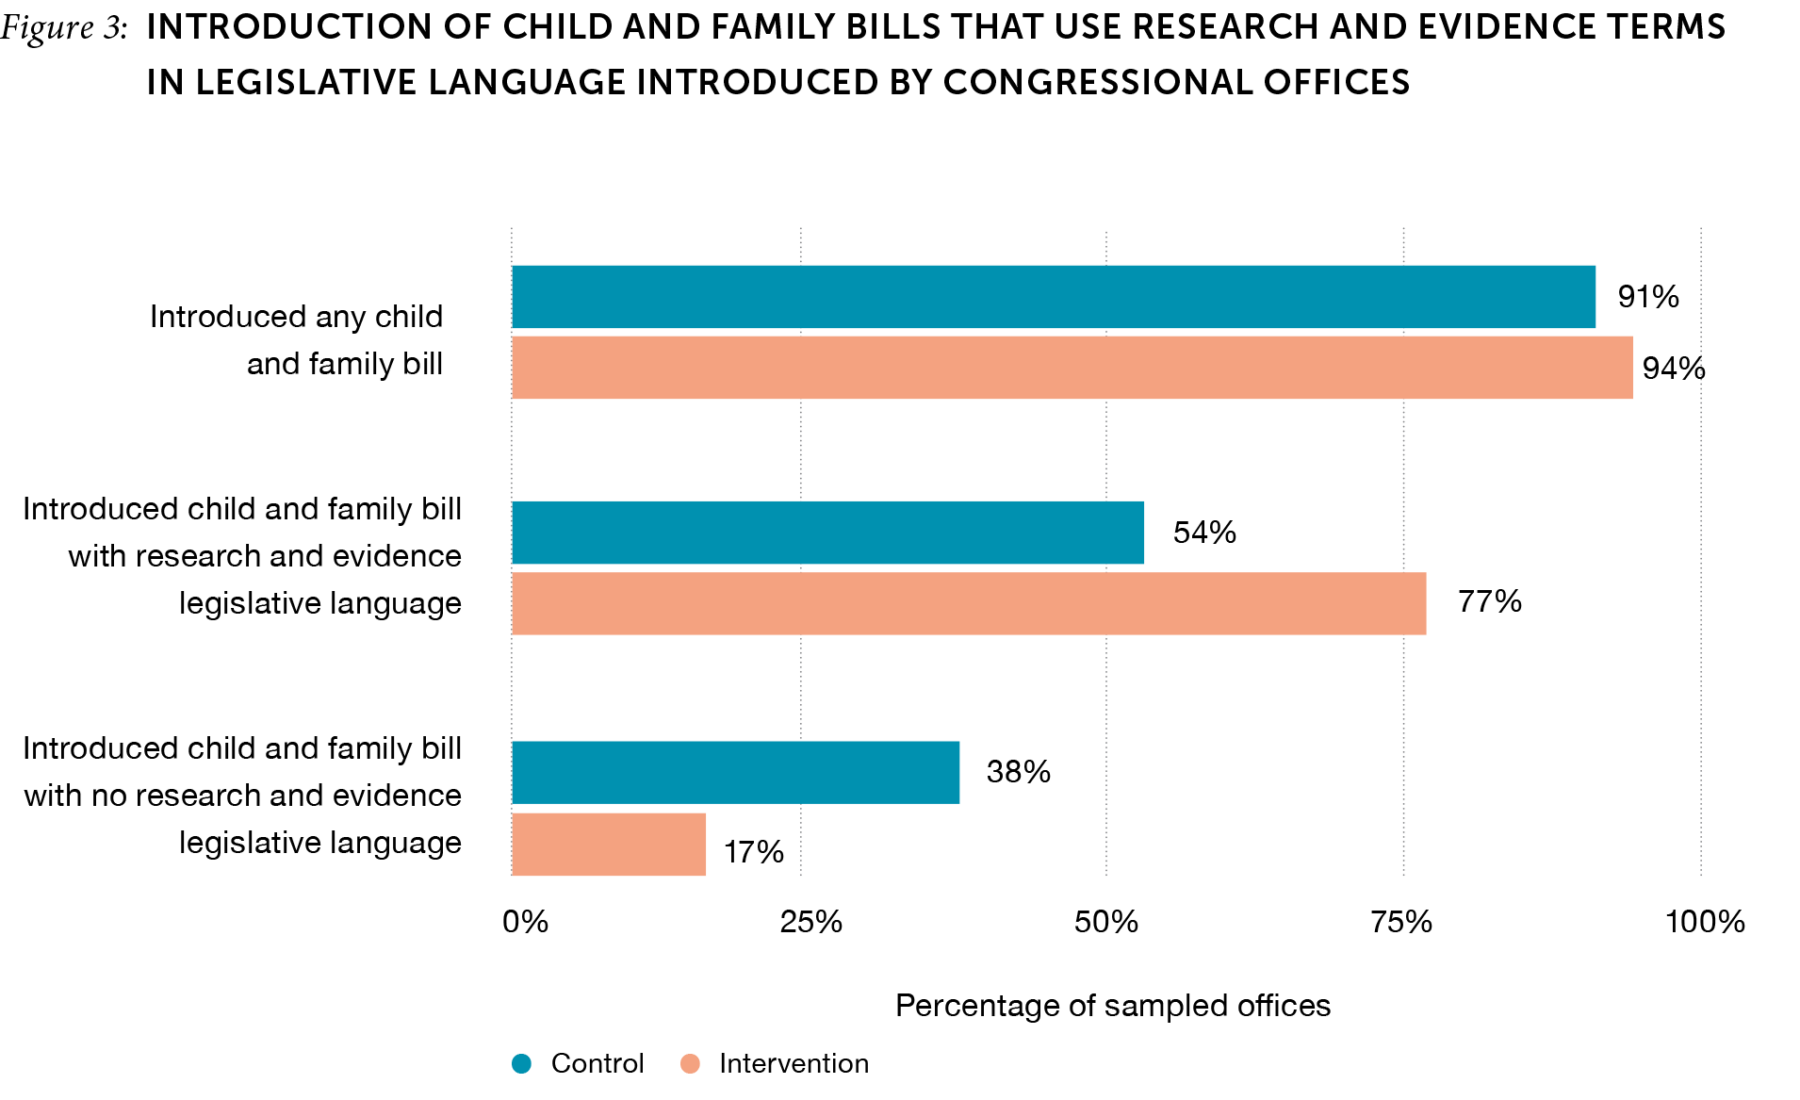 Bar chart of introduction of child and family bills that use research and evidence terms in legislative language introduced by congressional offices